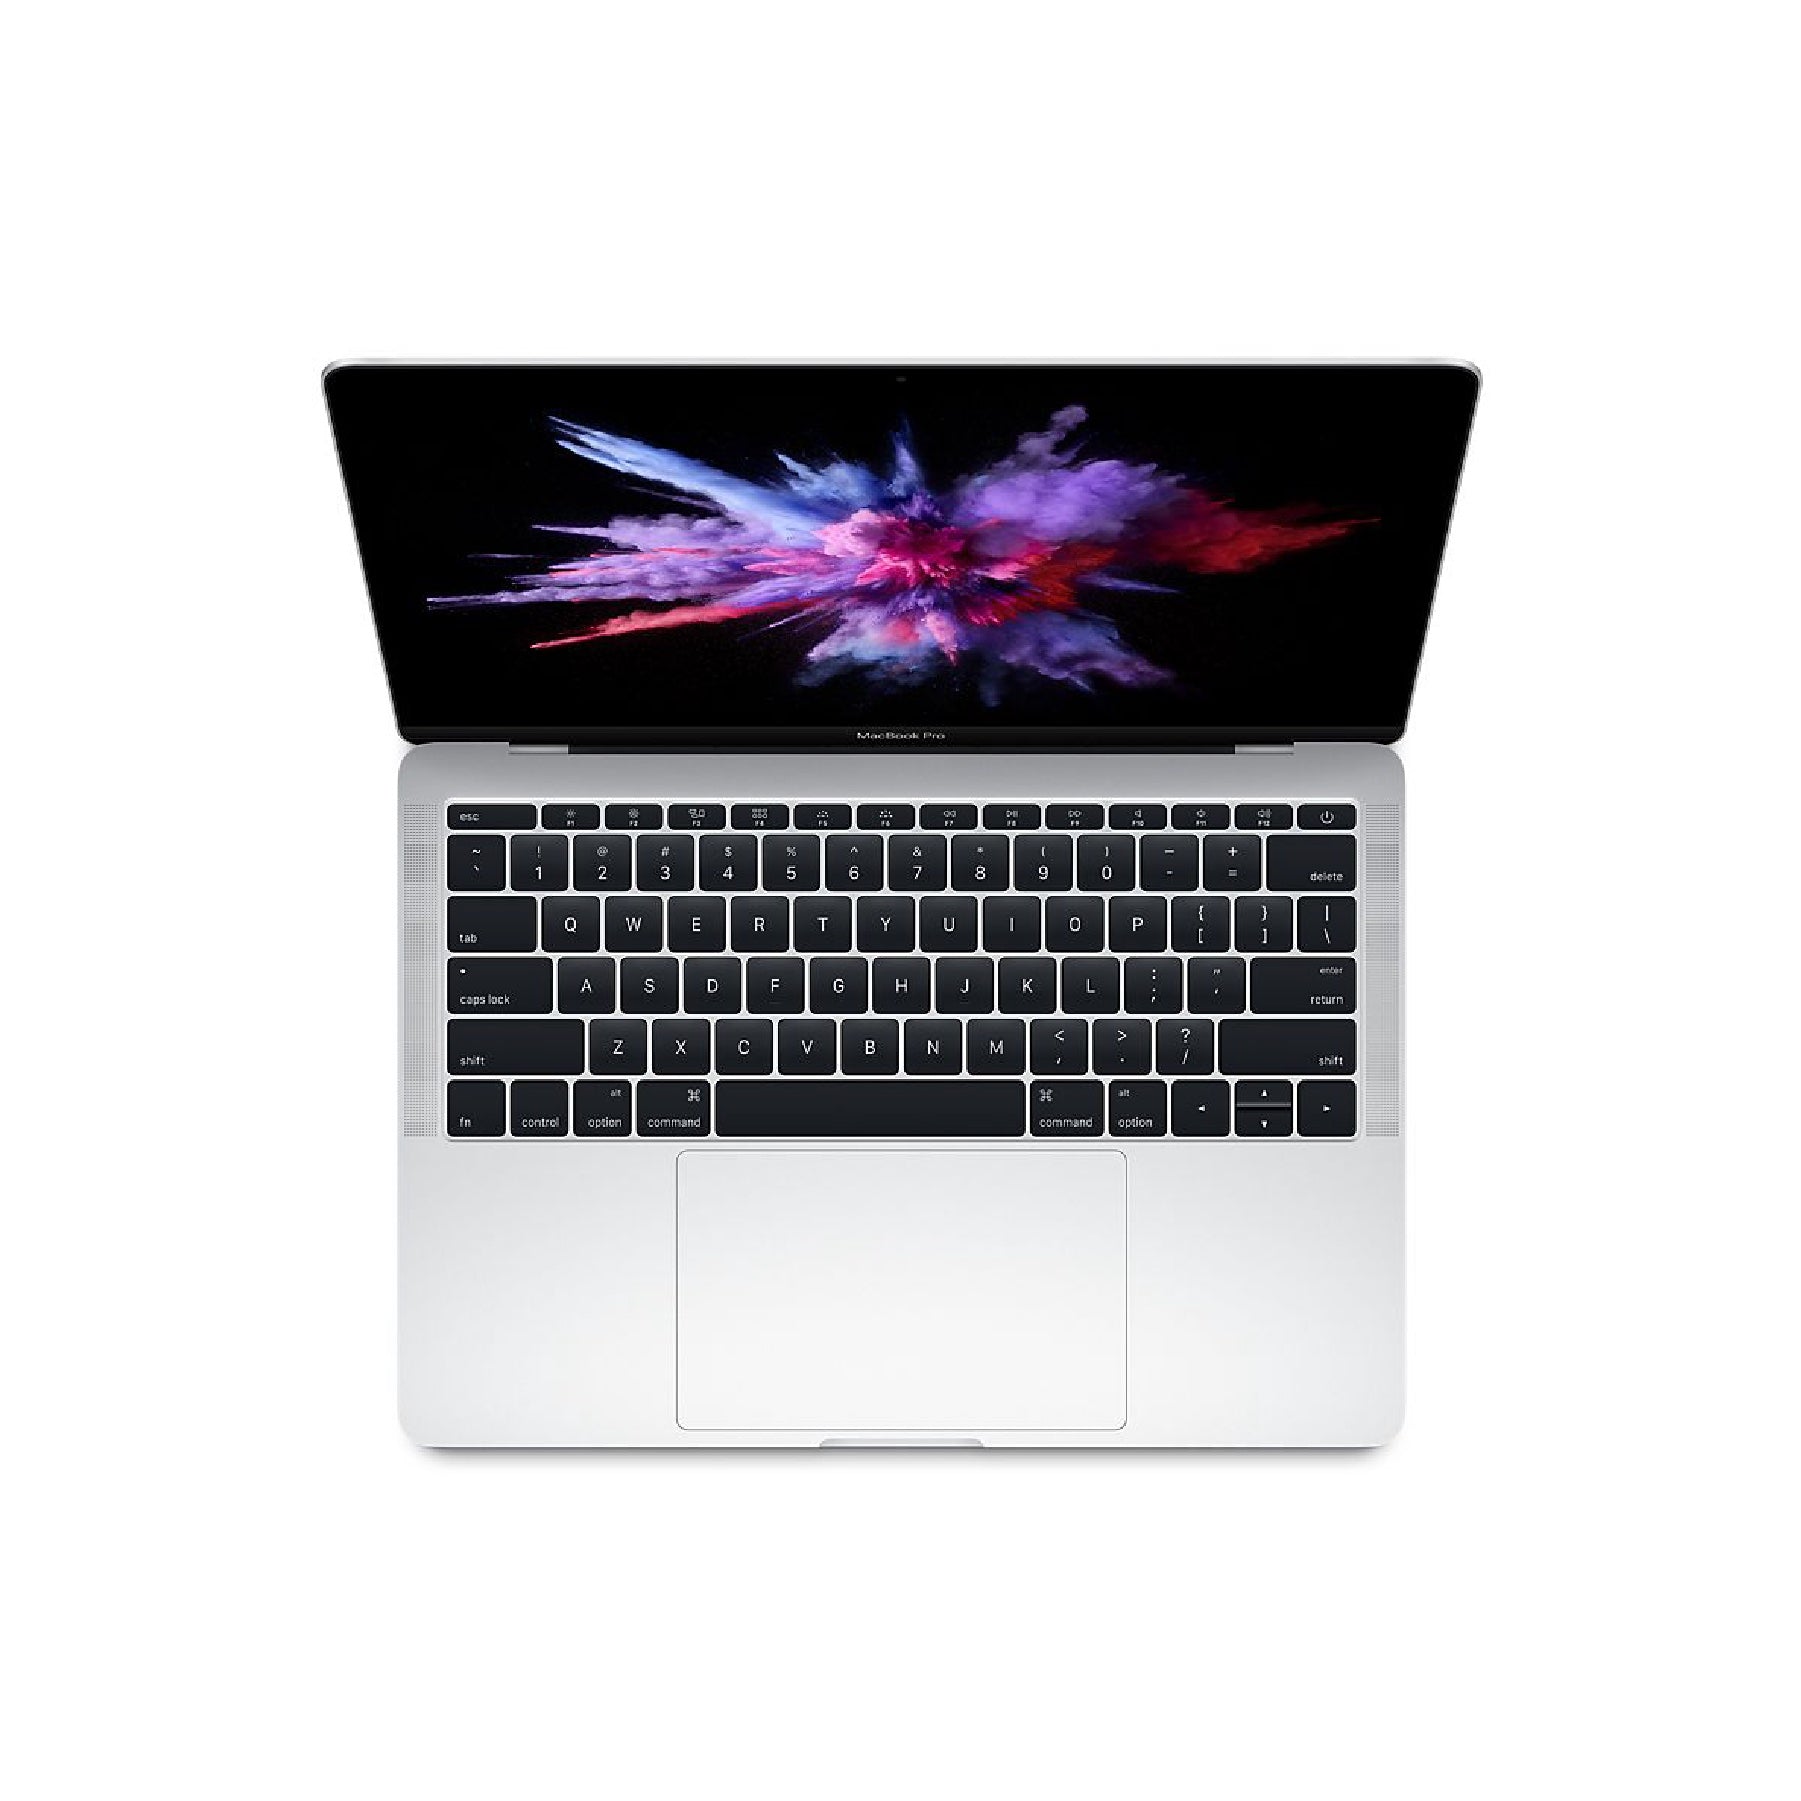 MacBook Pro (13-inch, 2017, Two Thunderbolt 3 ports) 2.3GHz, Intel Core i5 128GB - Silver (Better) - iStore Pre-owned